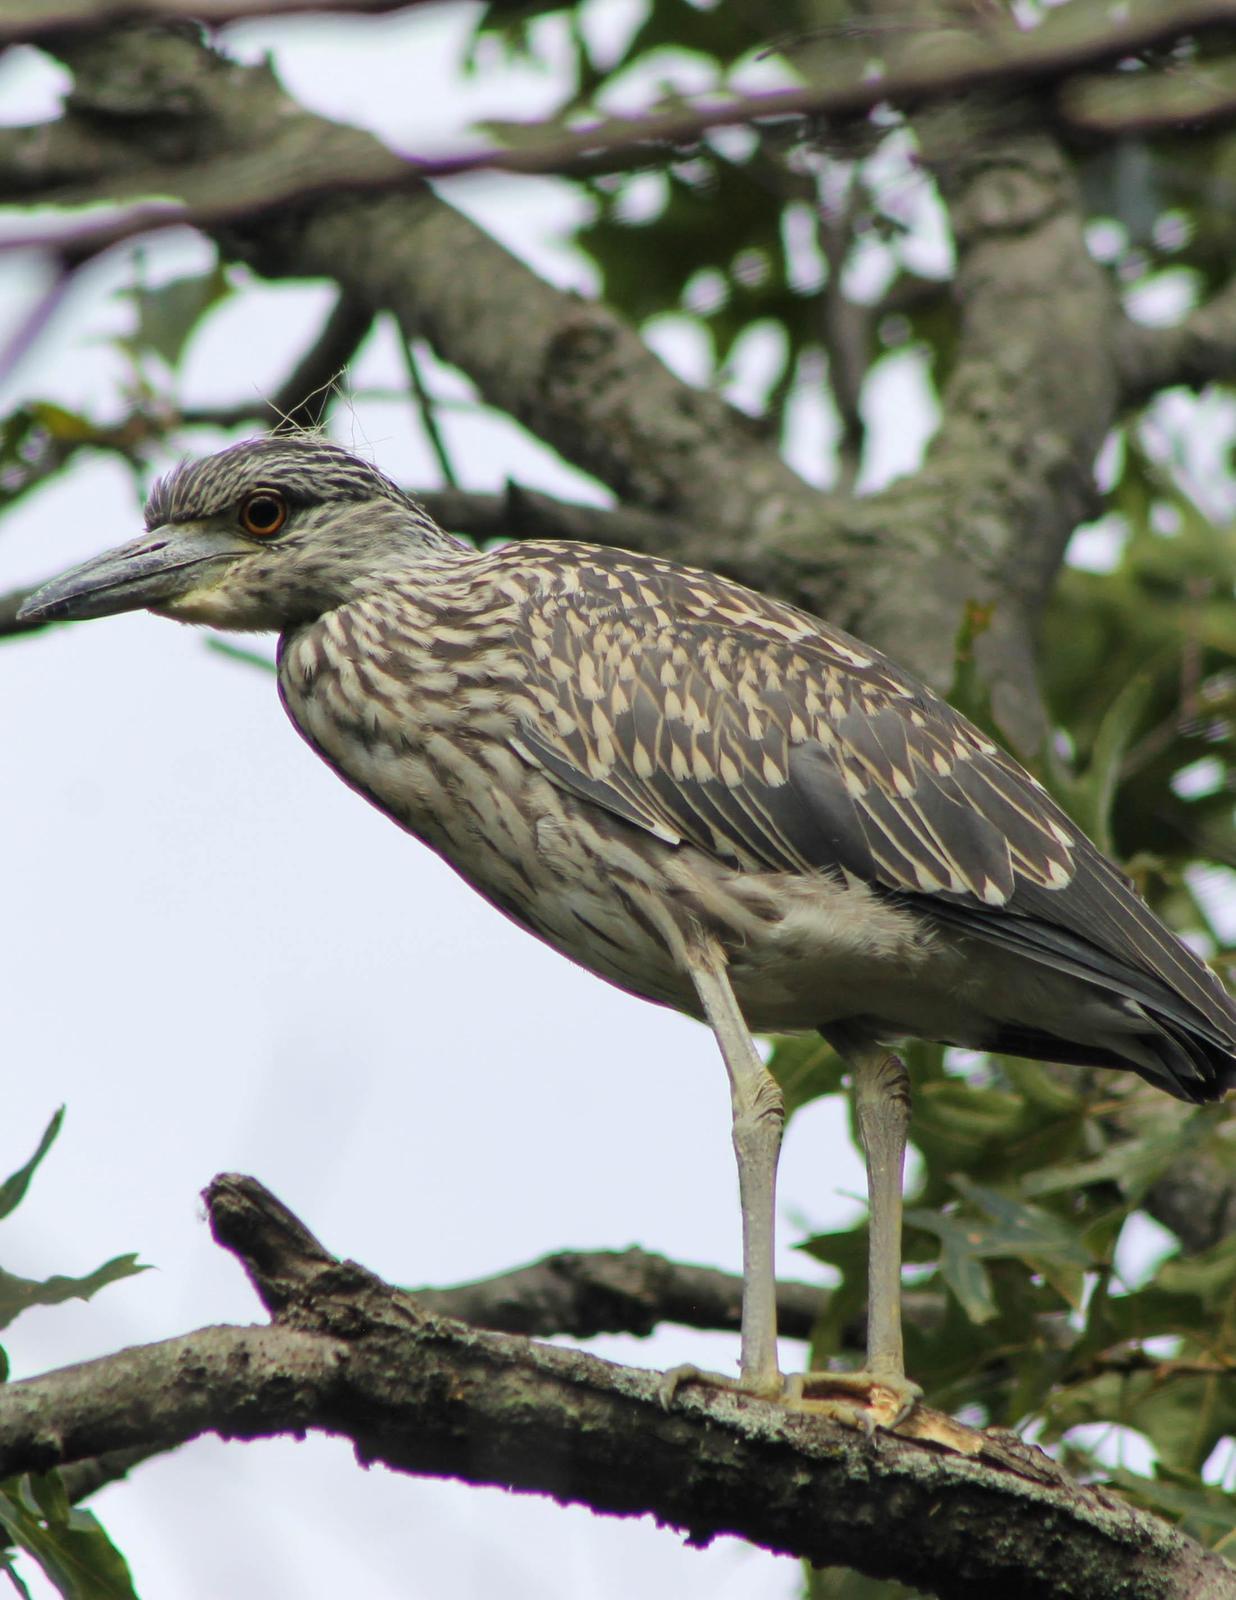 Yellow-crowned Night-Heron Photo by Roy Morris